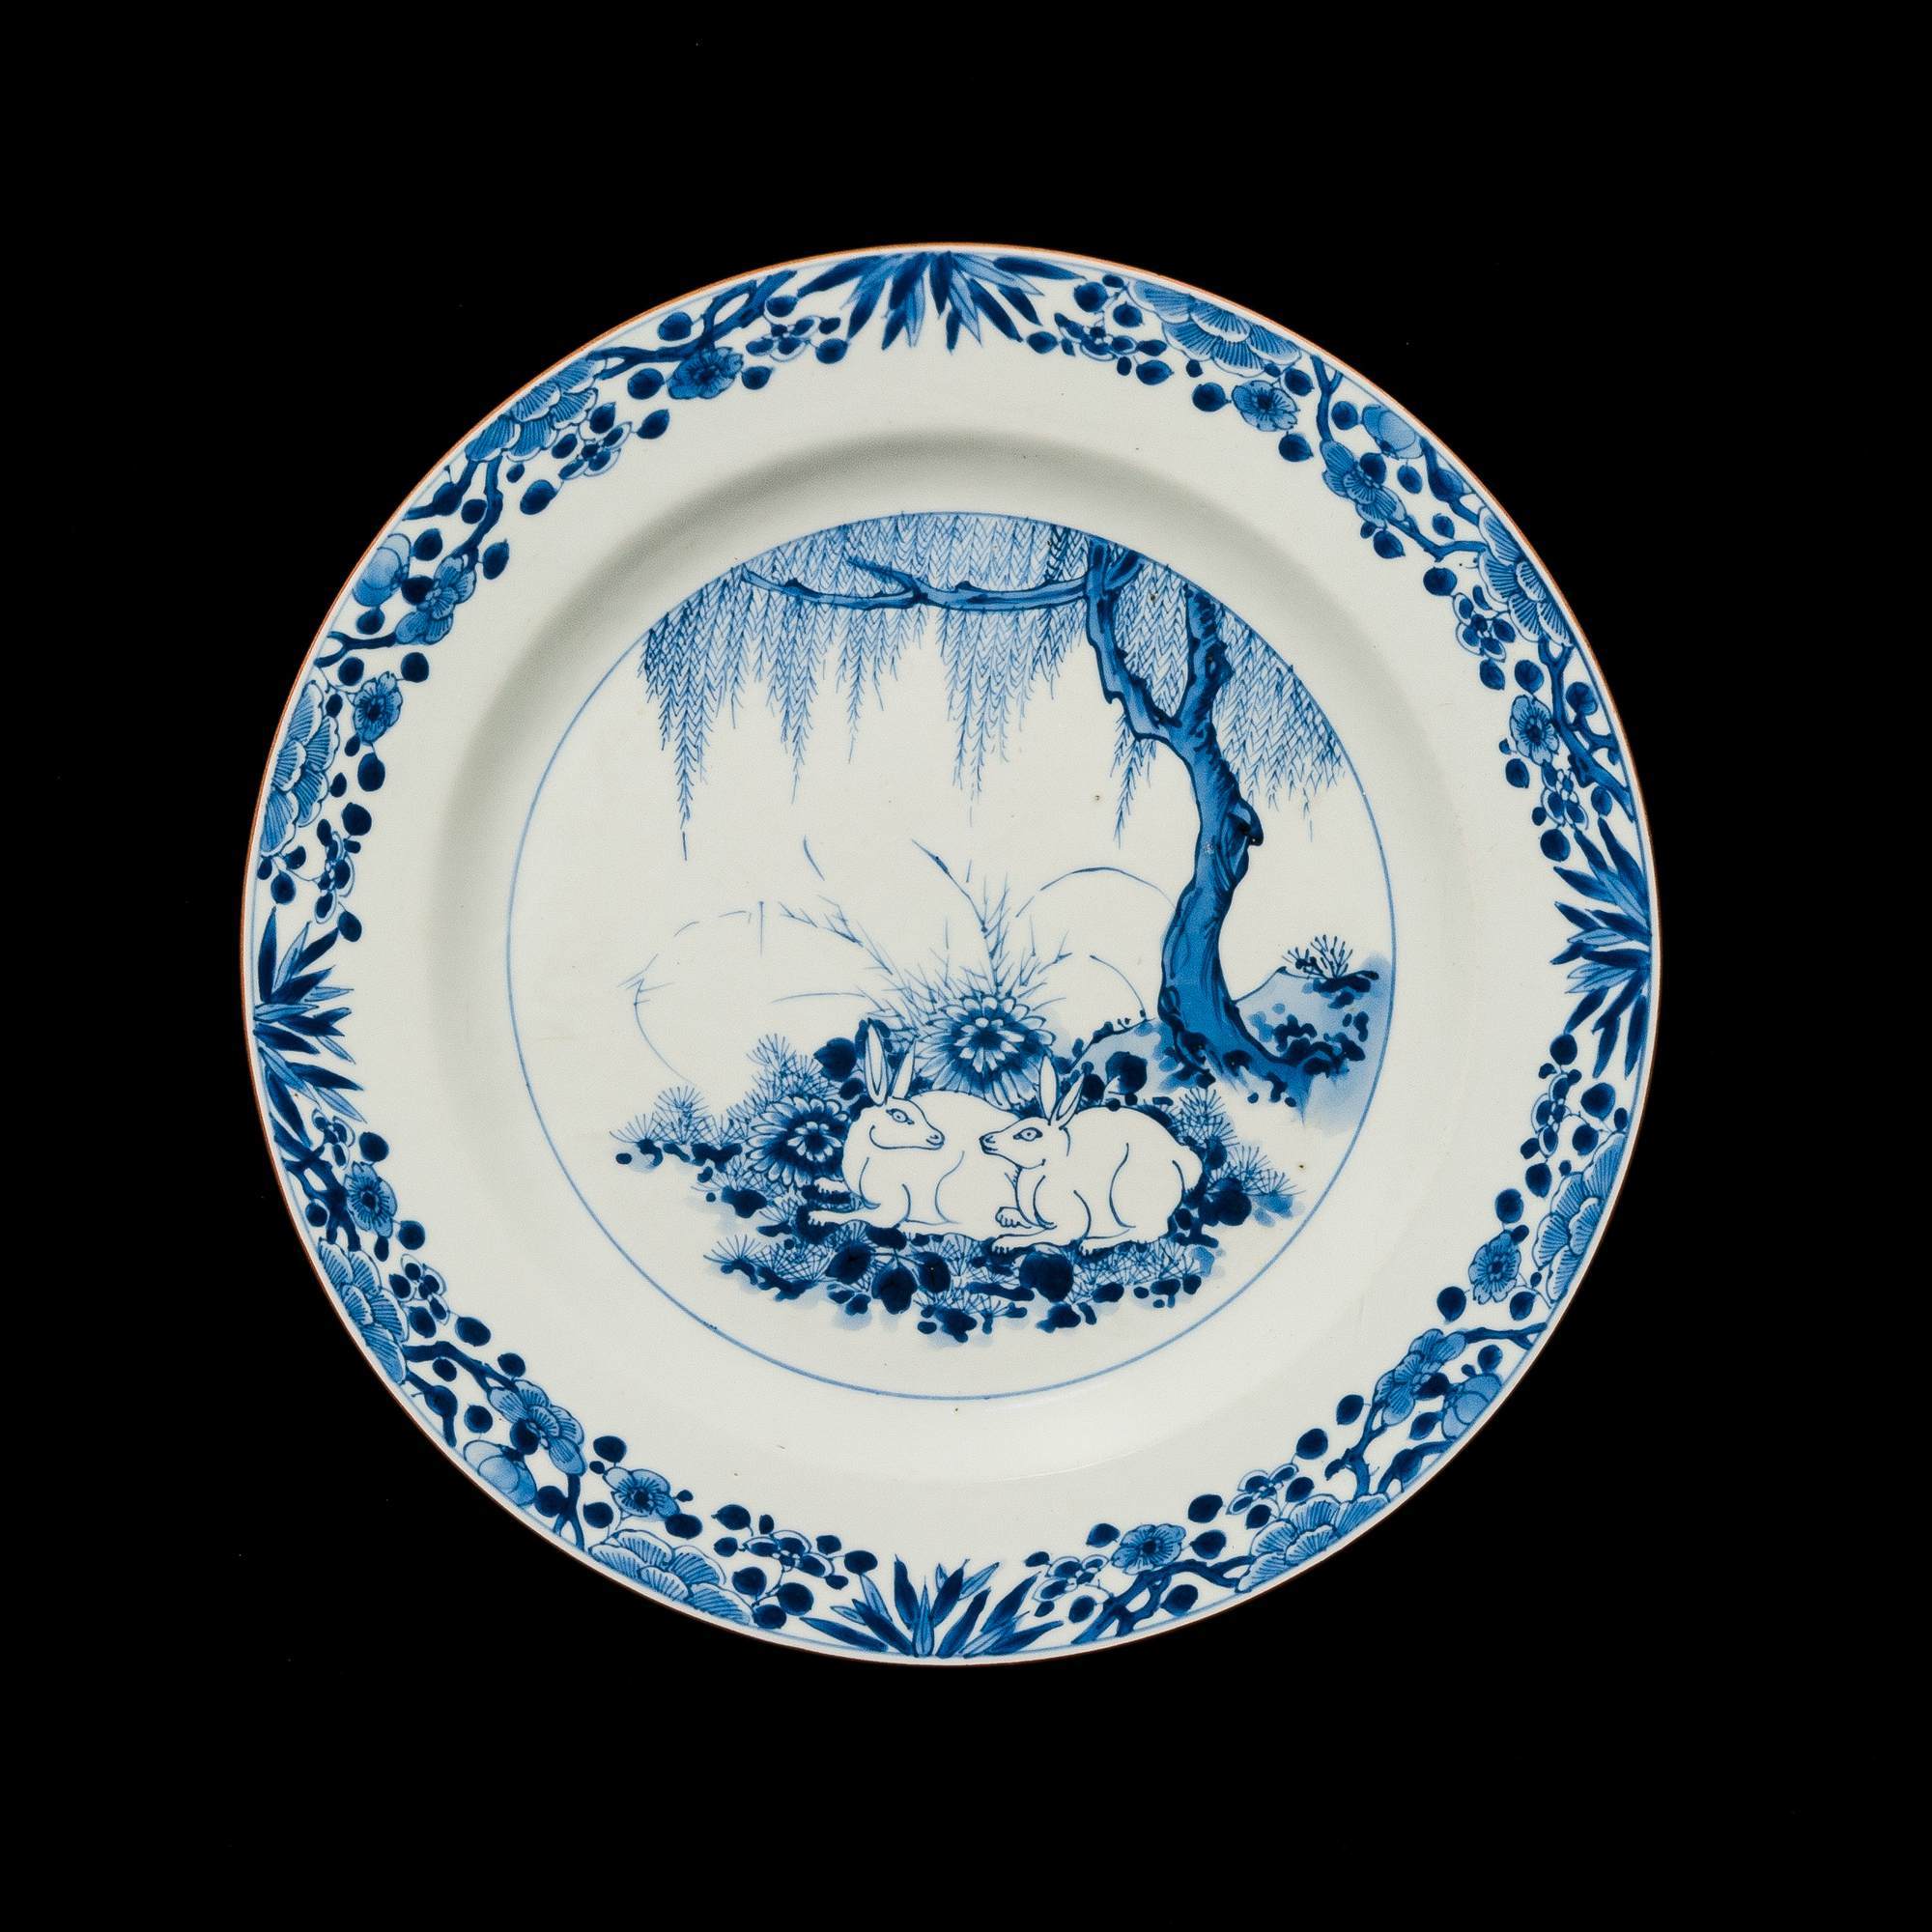 Image Credit: Dish Decorated with a Pair of Rabbits. China, Qing Dynasty, ca. 1661-1722. Porcelain with cobalt blue underglaze. h. 1 1/2 in. (3.8 cm); diam. 12 3/4 in. (32.4 cm). Gift of Lenora and Walter F. Brown, 2008.21.40.